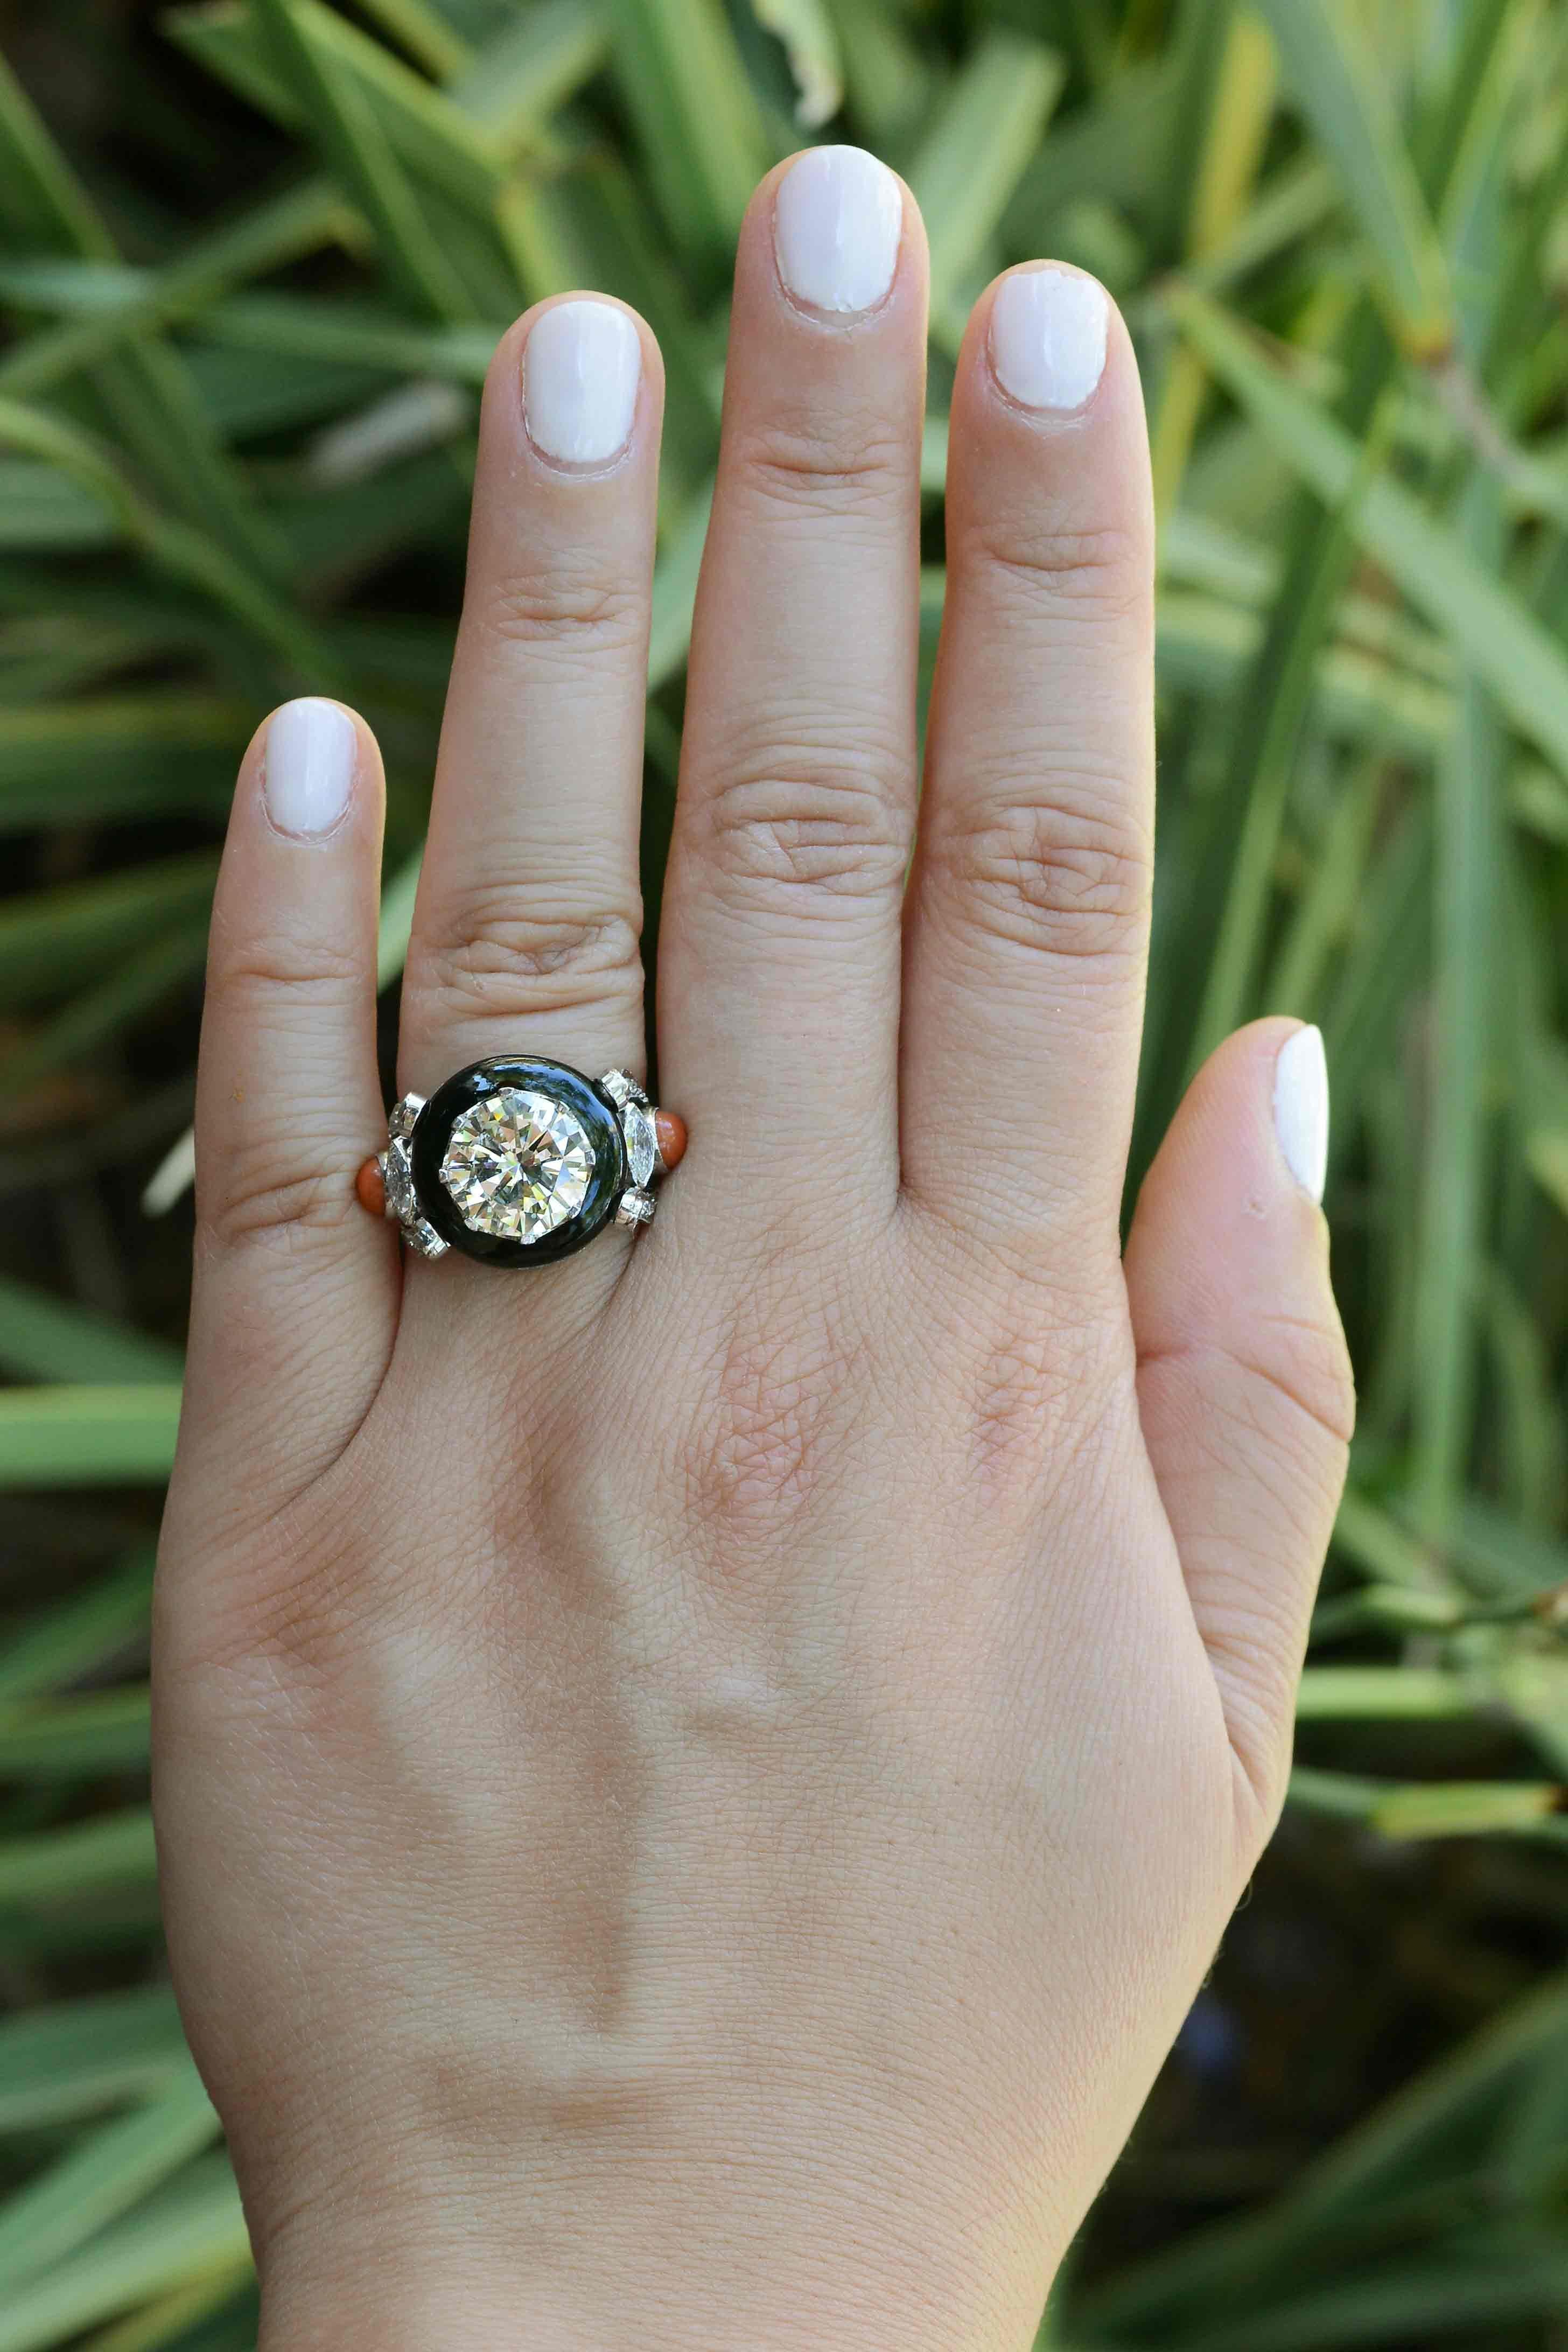 The Sheryl coral, black onyx and diamond engagement ring is a most intriguing, authentic Art Deco masterpiece. Centered by a scintillating and large 3.58 carat round diamond that lights up the room. Making this cocktail ring even more impressive is